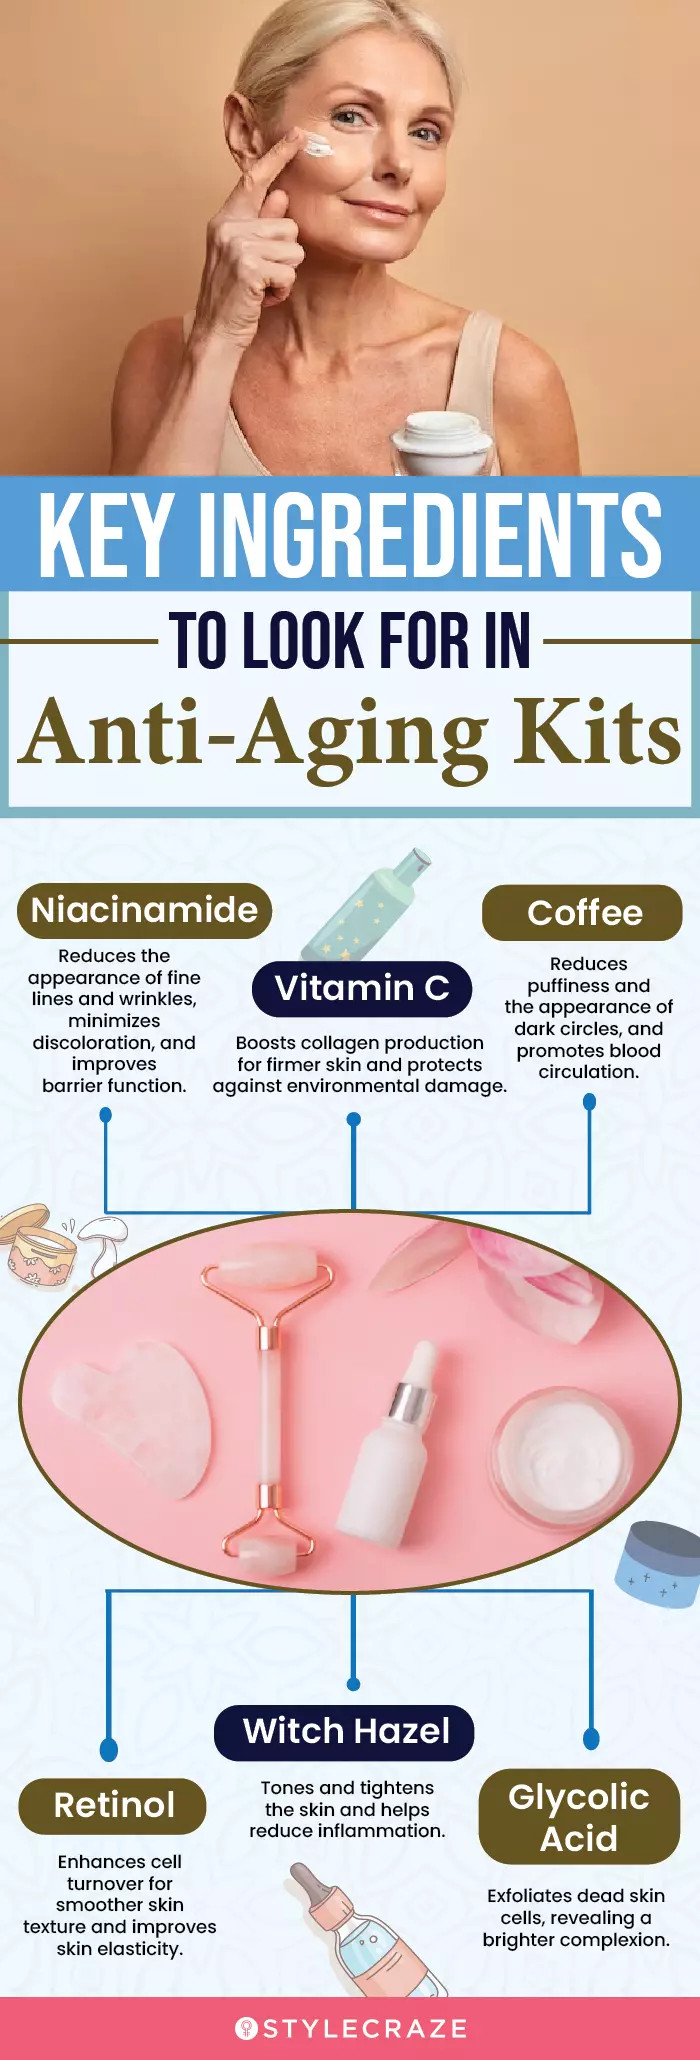 Key Ingredients To Look For In Anti-Aging Kits (infographic)